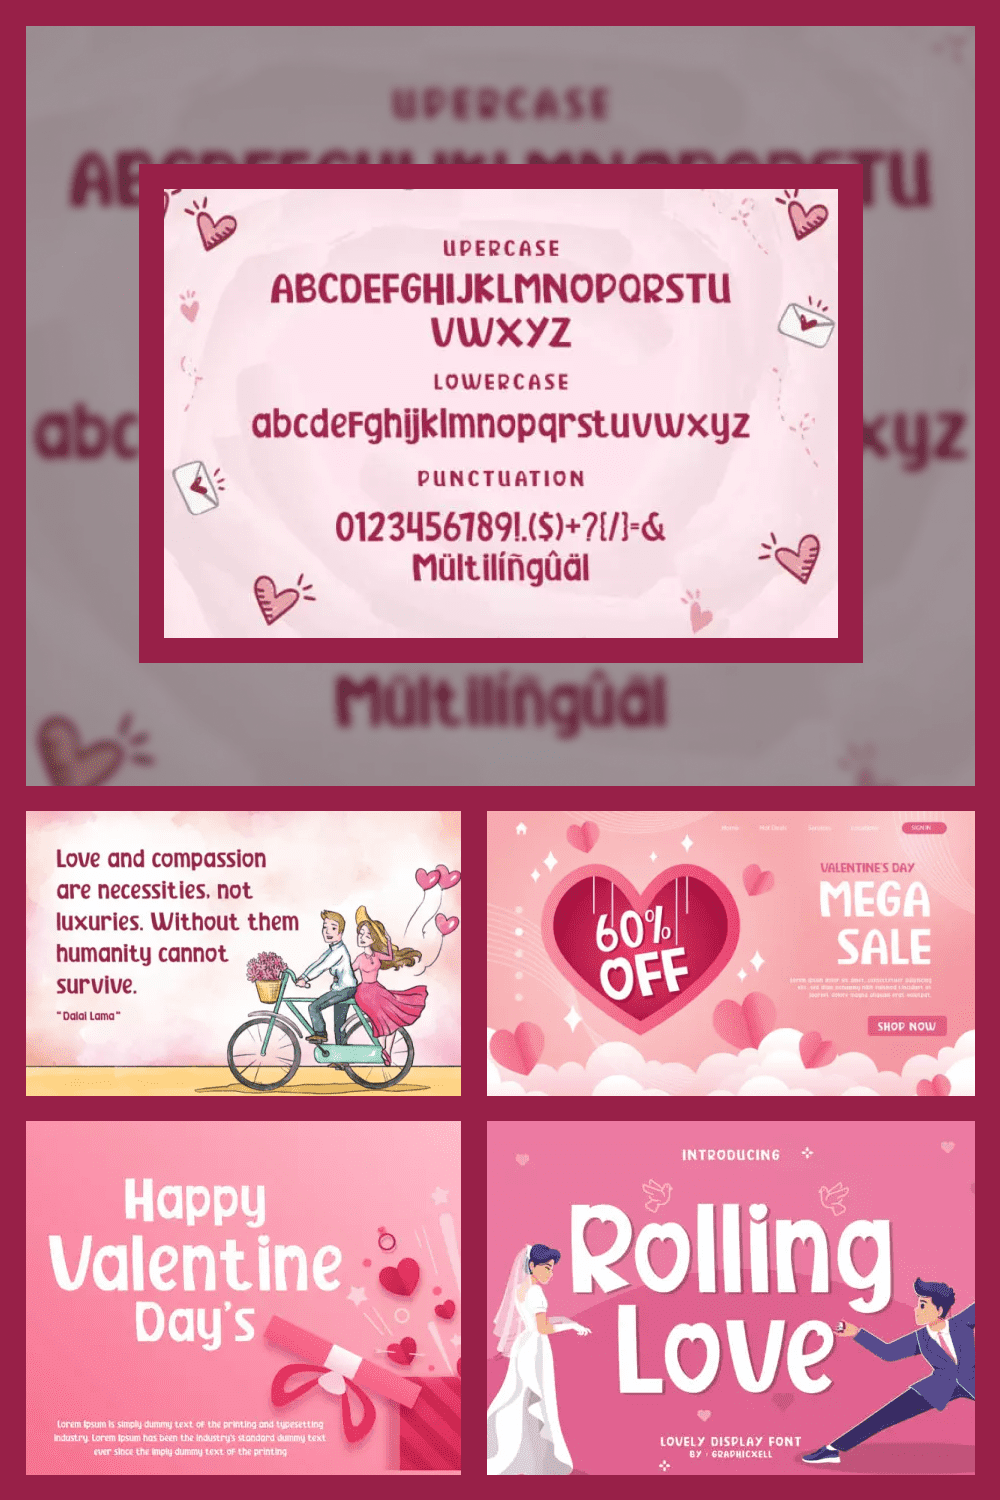 Collage of images with cute font on pink backgrounds.